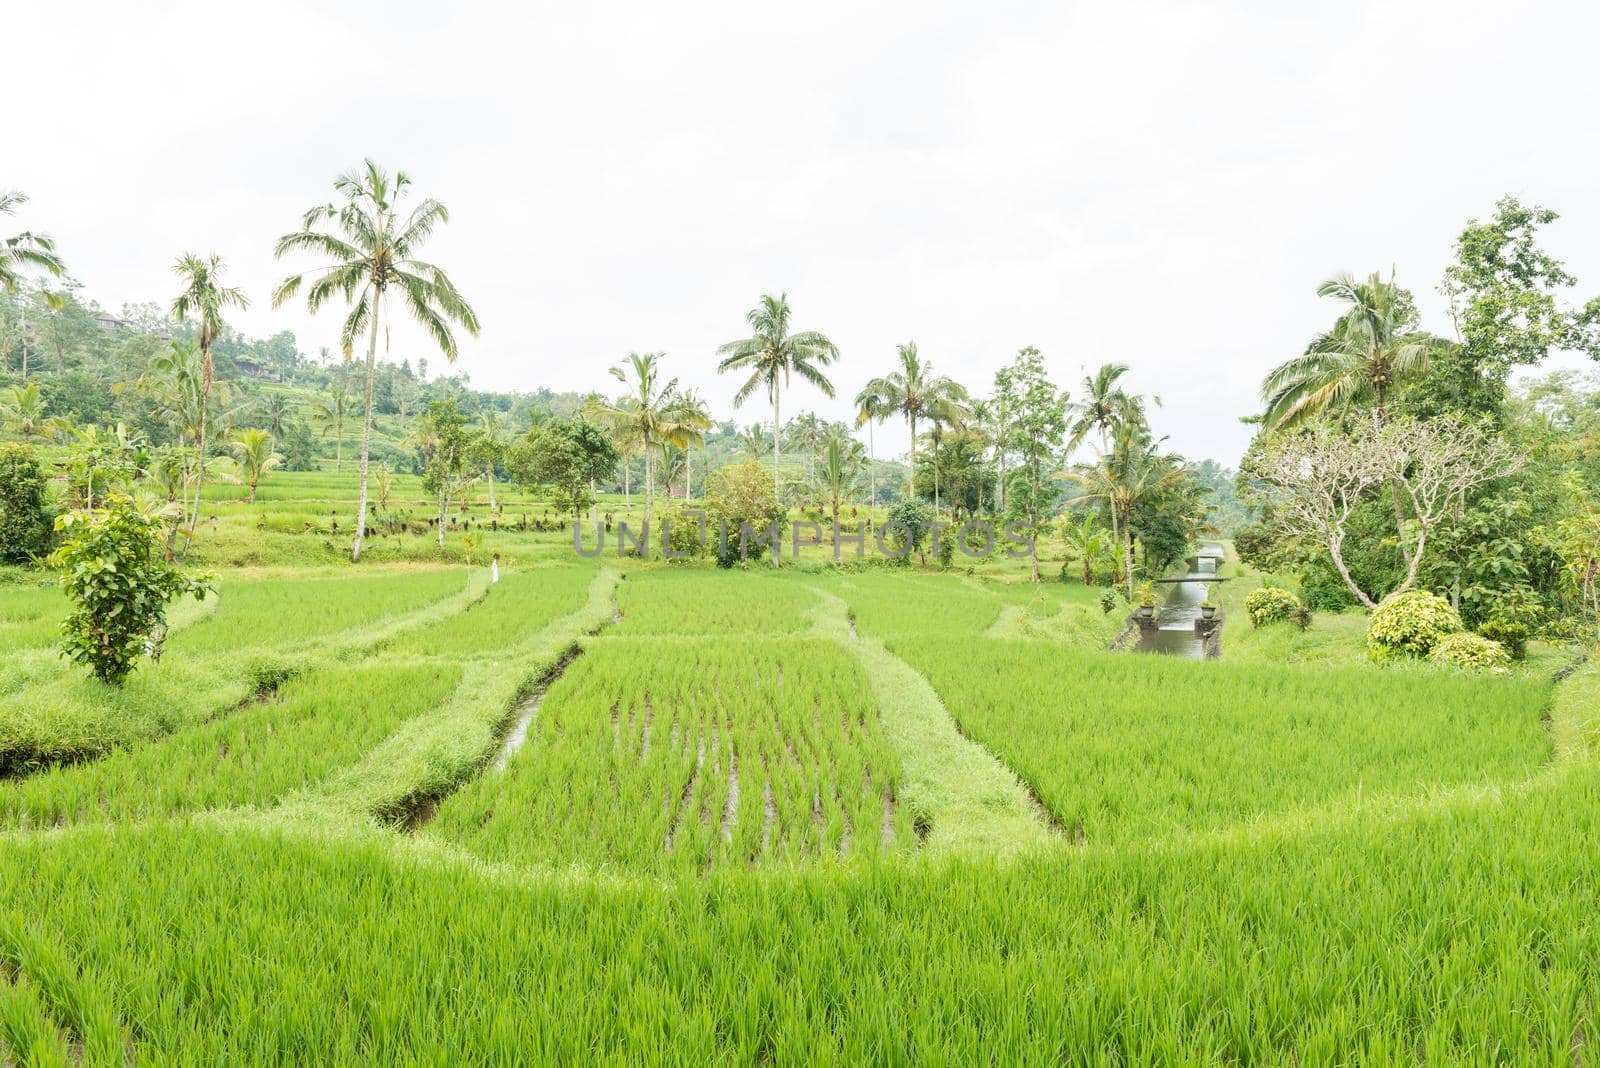 Rice paddies of Bali on the cloudy overcast day with a little rain